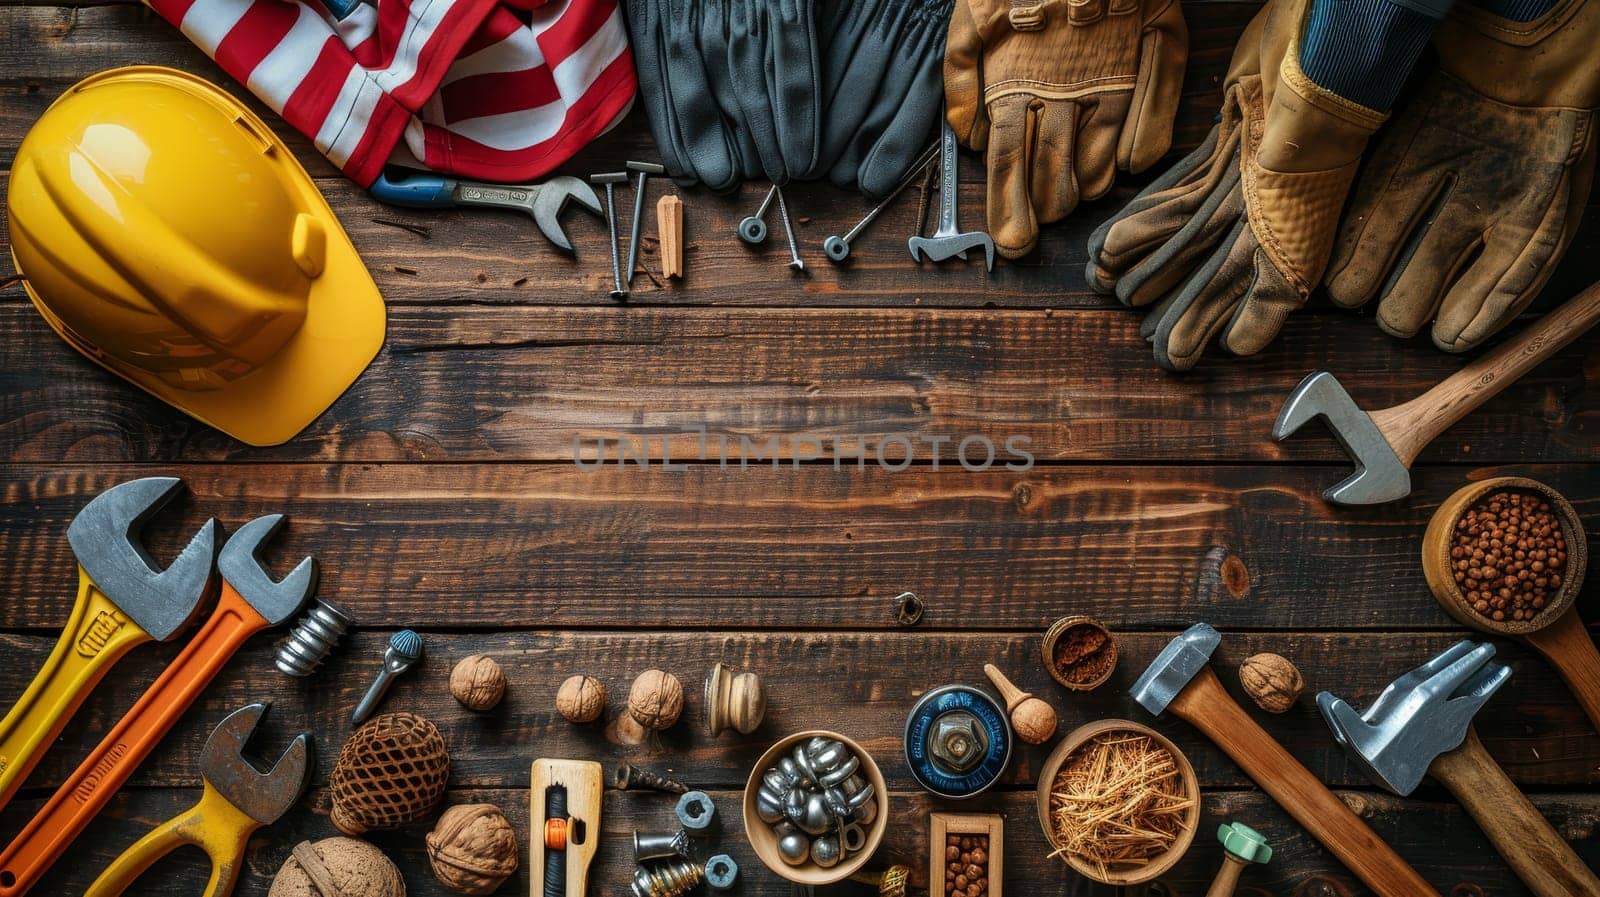 This Labor Day promotion portrays an American flag, screwdriver, pipe wrench, hammer, screws, nuts, gloves, dowel nail, helmet on a plywood surface.